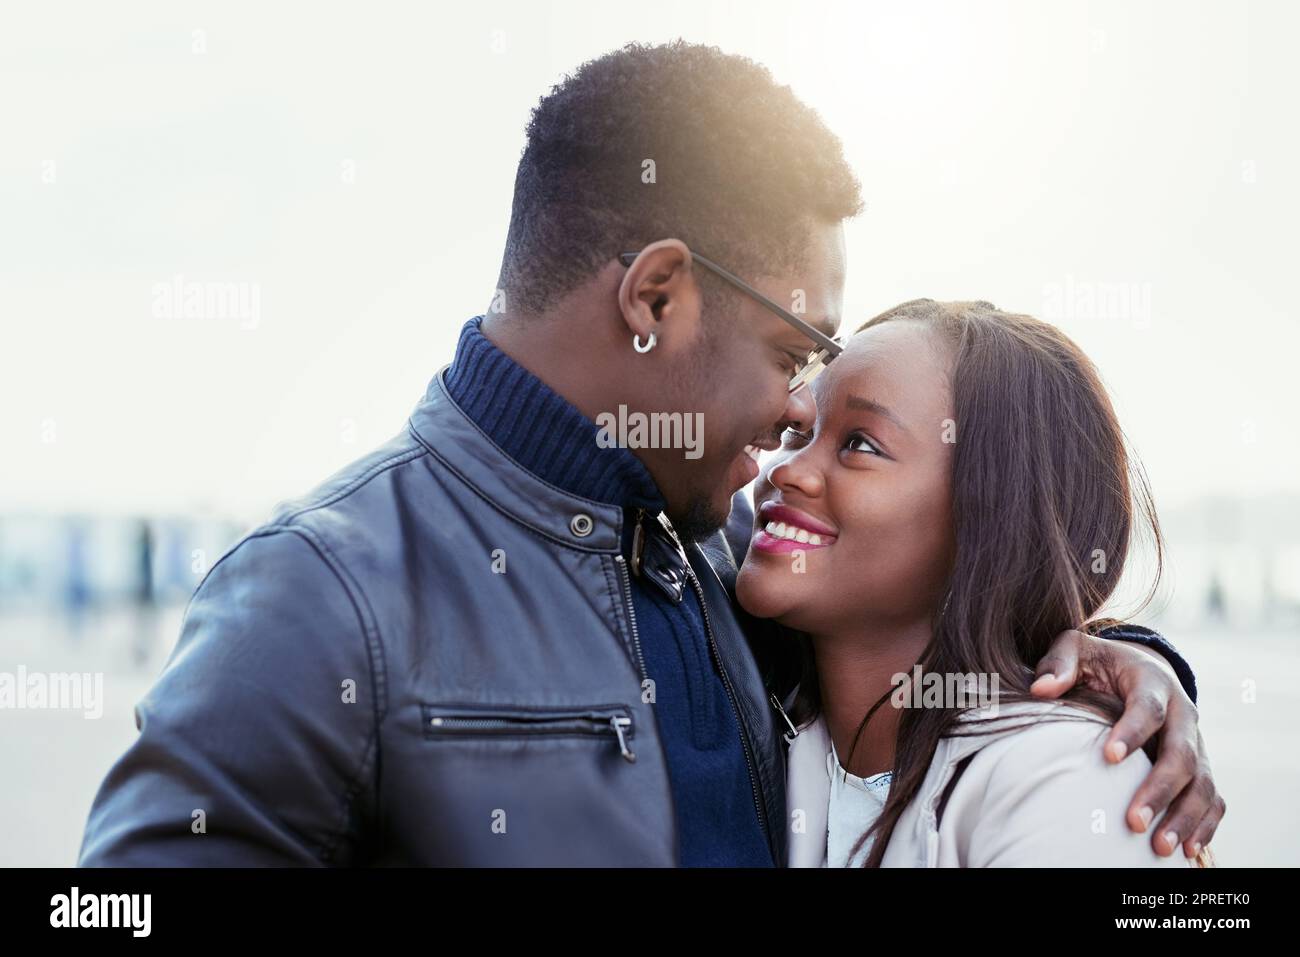 Im so lucky to call you mine. an affectionate young couple bonding together outdoors. Stock Photo